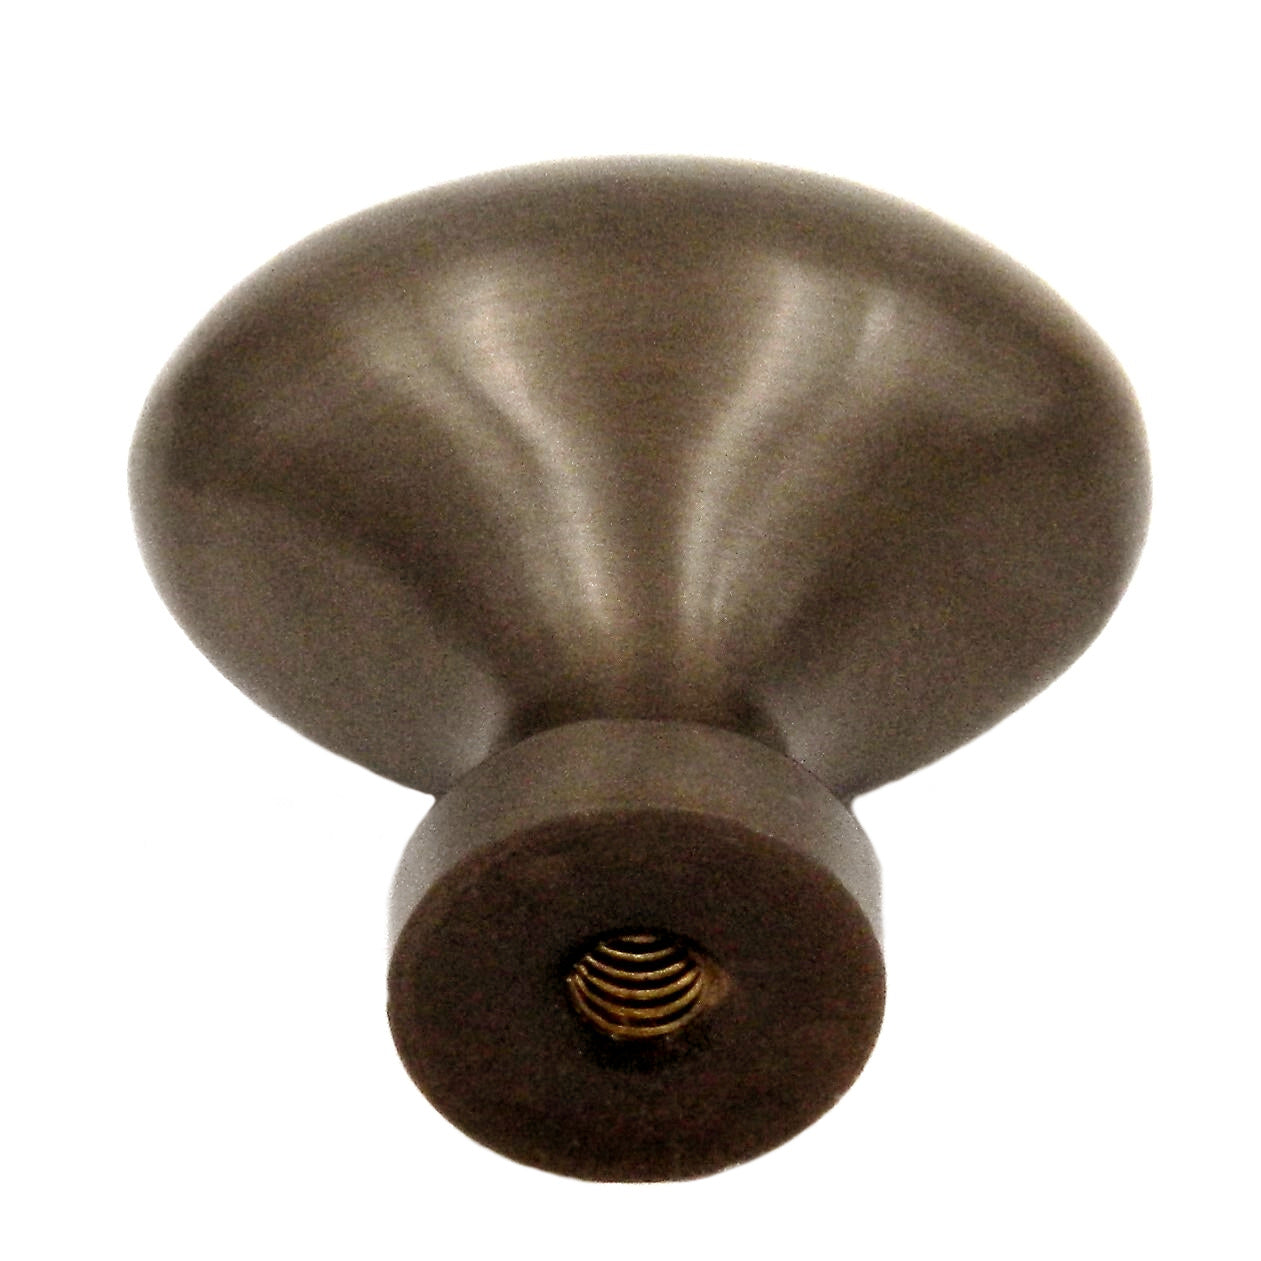 Keeler Power & Beauty Satin Dover Oval Smooth 1 1/4" Solid Brass Cabinet Knob P9175-9013